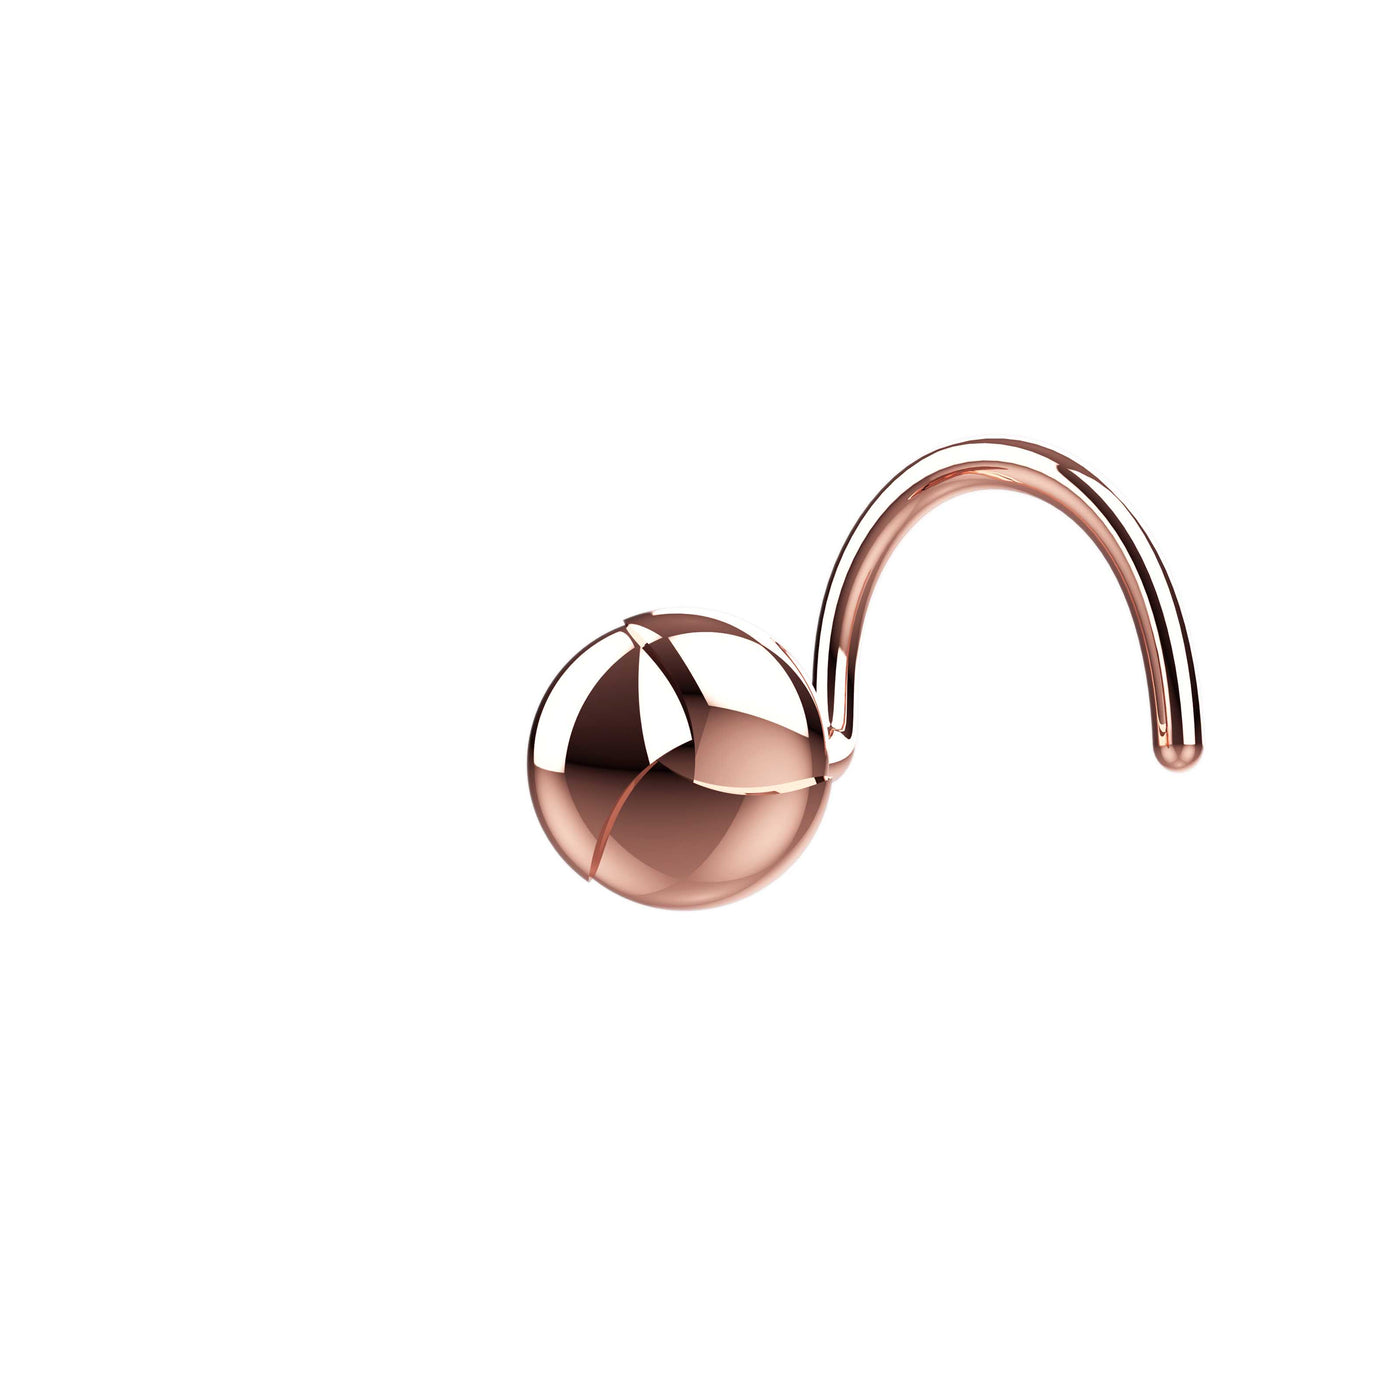 Traditional rose gold nose jewelry